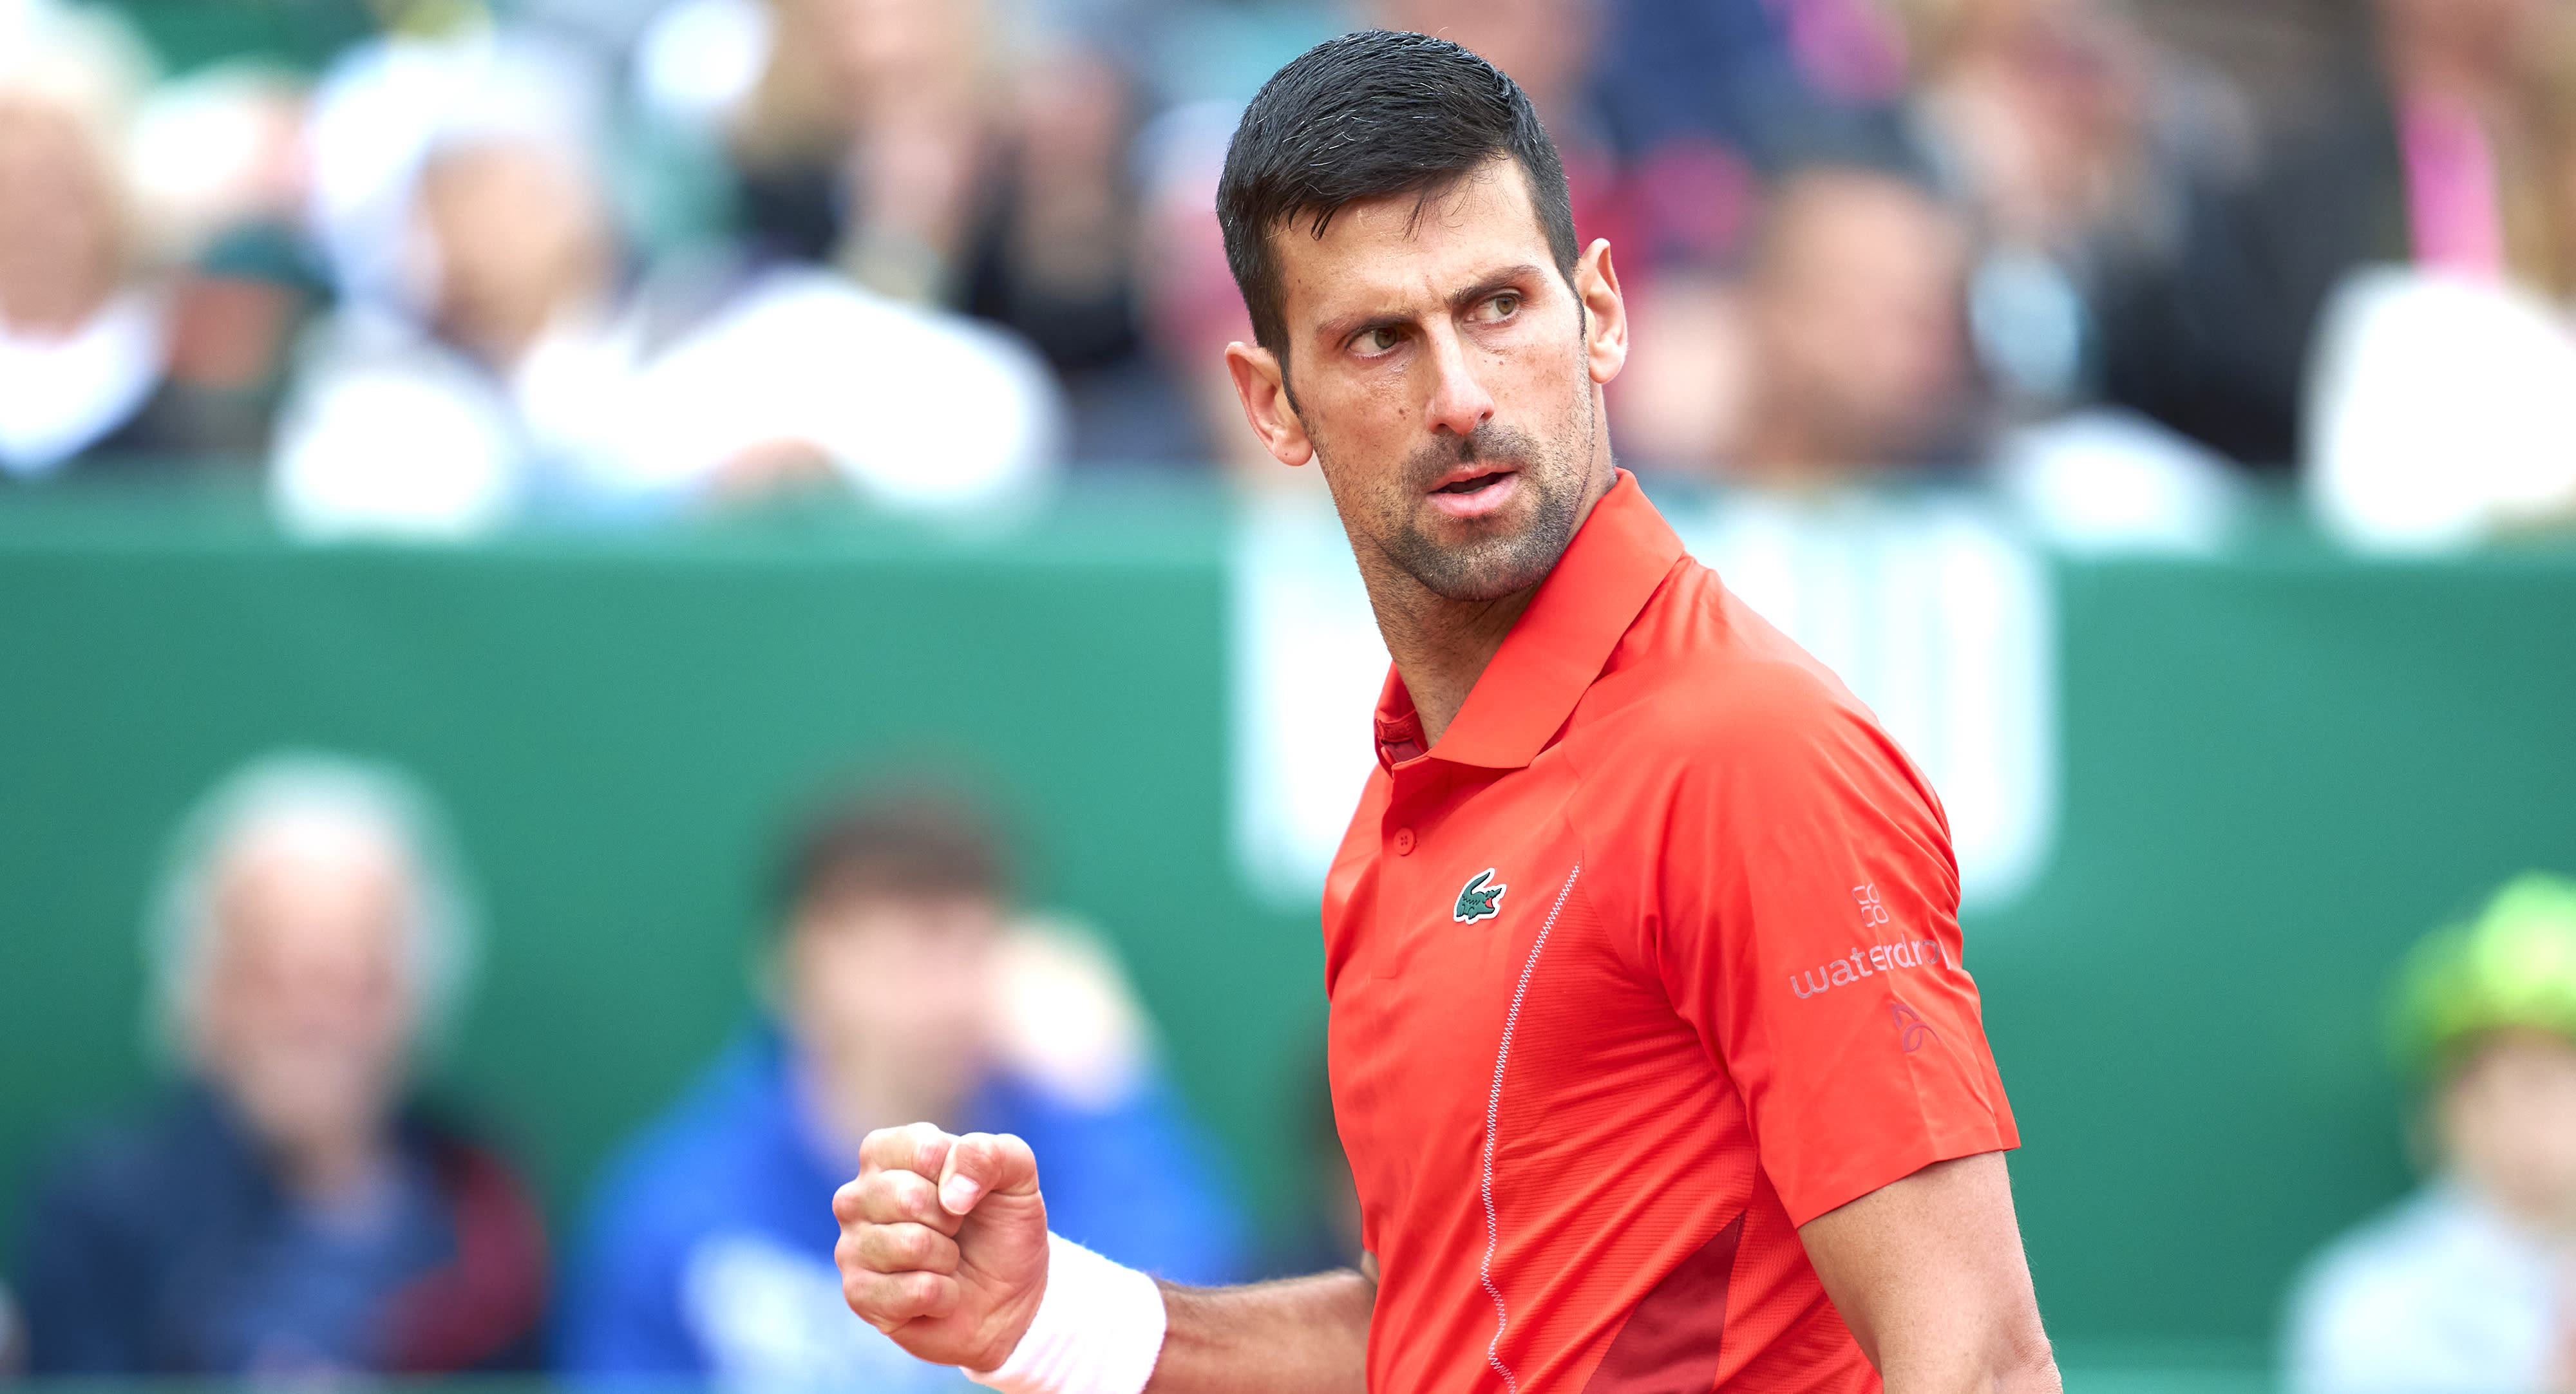 Novak Djokovic on the brink of 1,100 career wins after opening victory over Moutet in Rome | Tennis.com